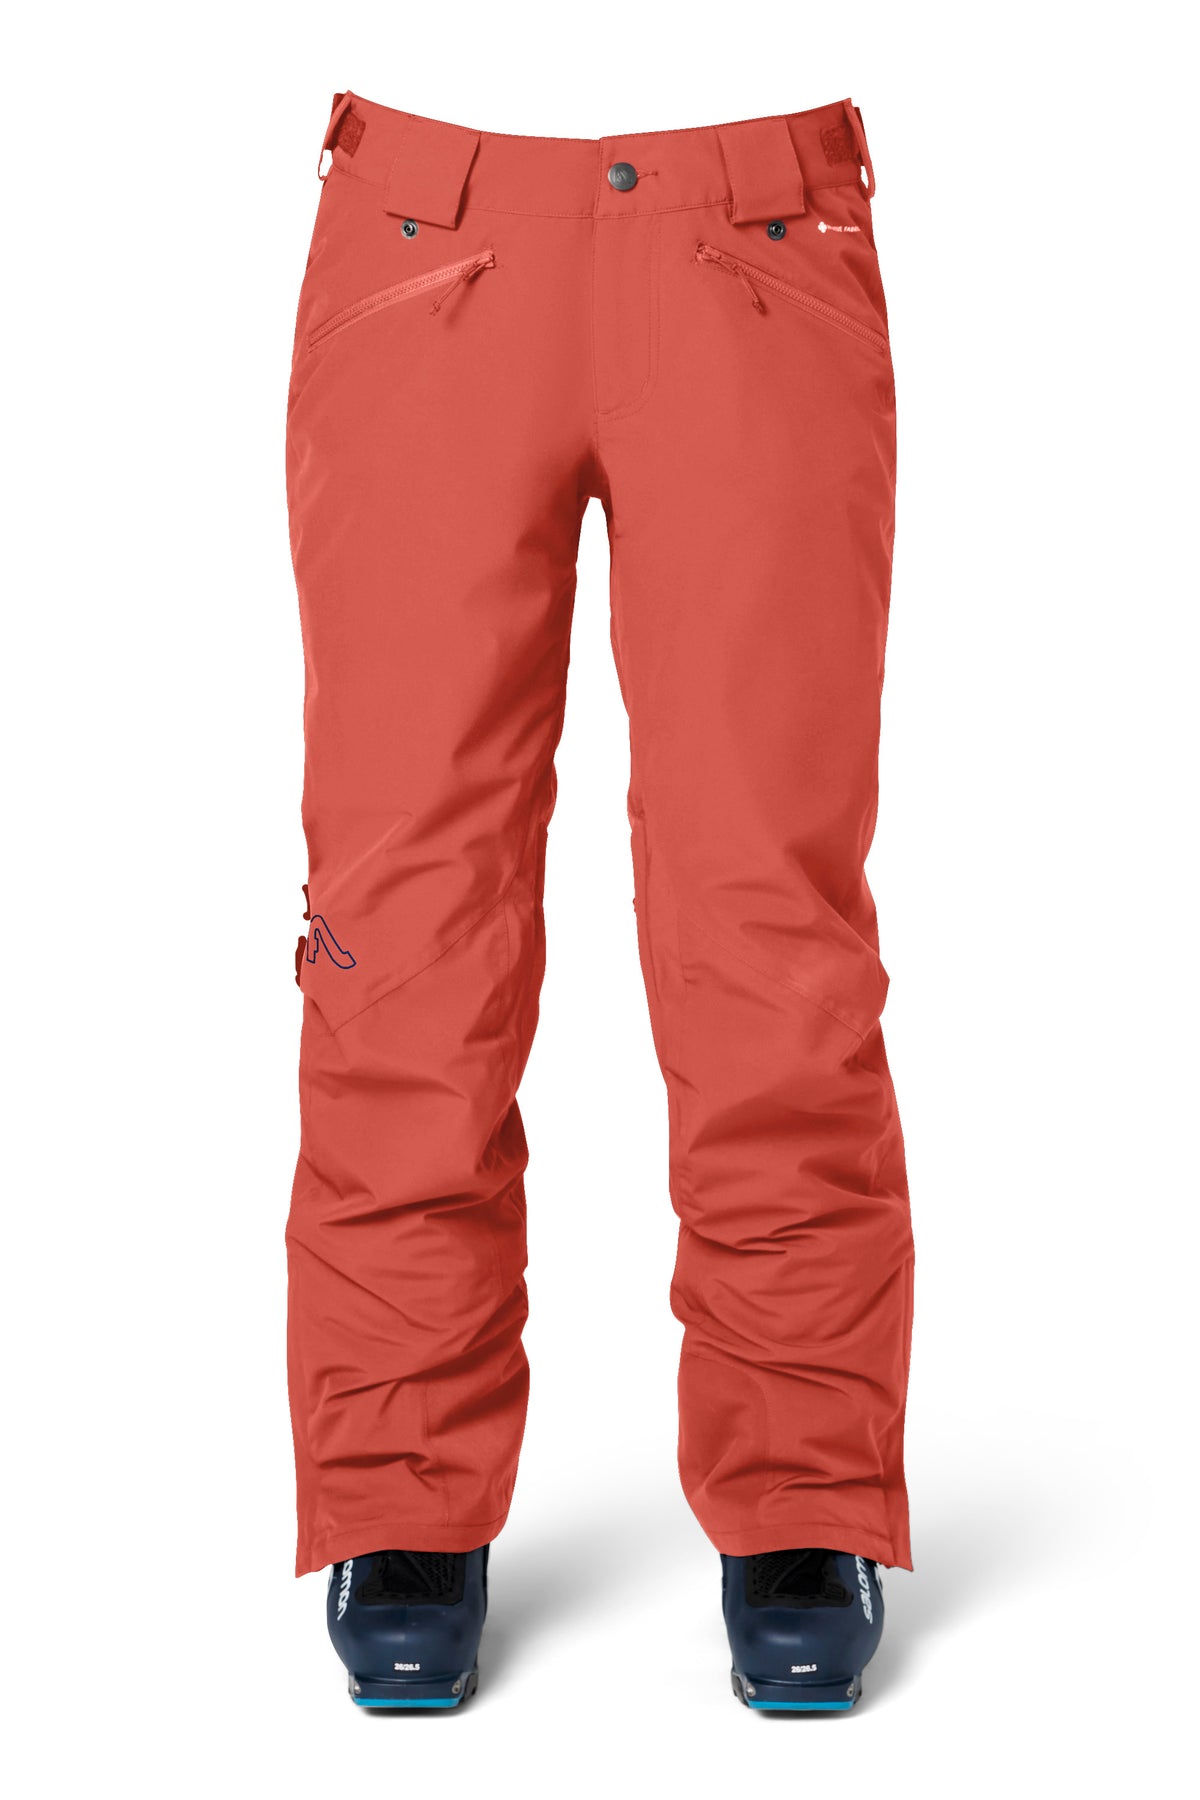 Flylow Fae Insulated Pant Review: Change Your Sport, Not Your